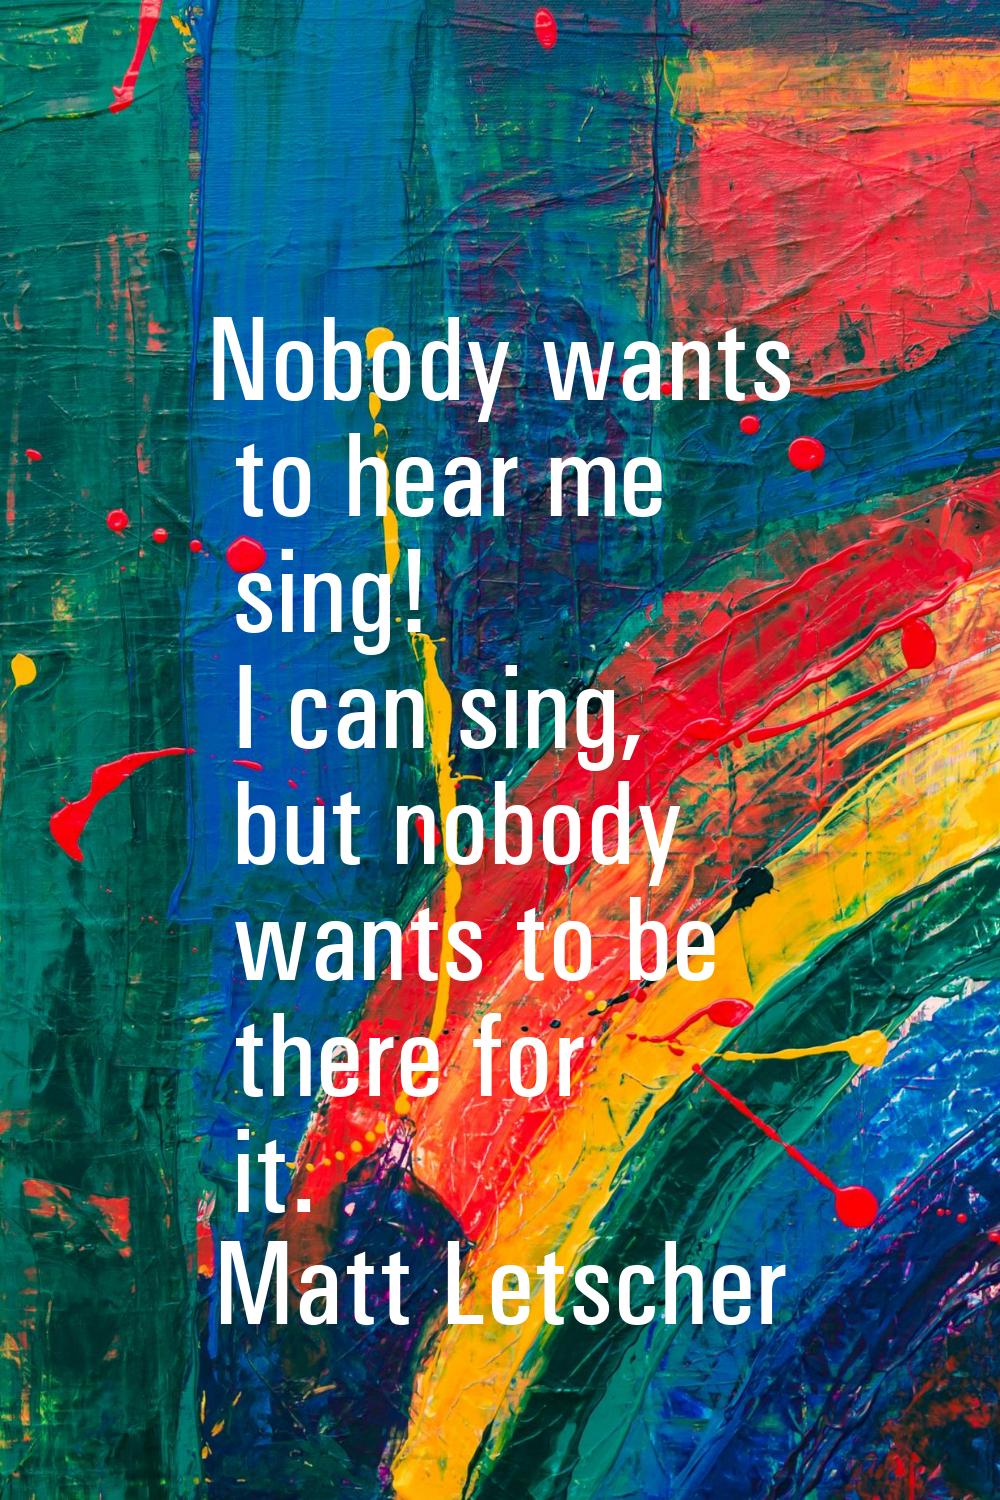 Nobody wants to hear me sing! I can sing, but nobody wants to be there for it.